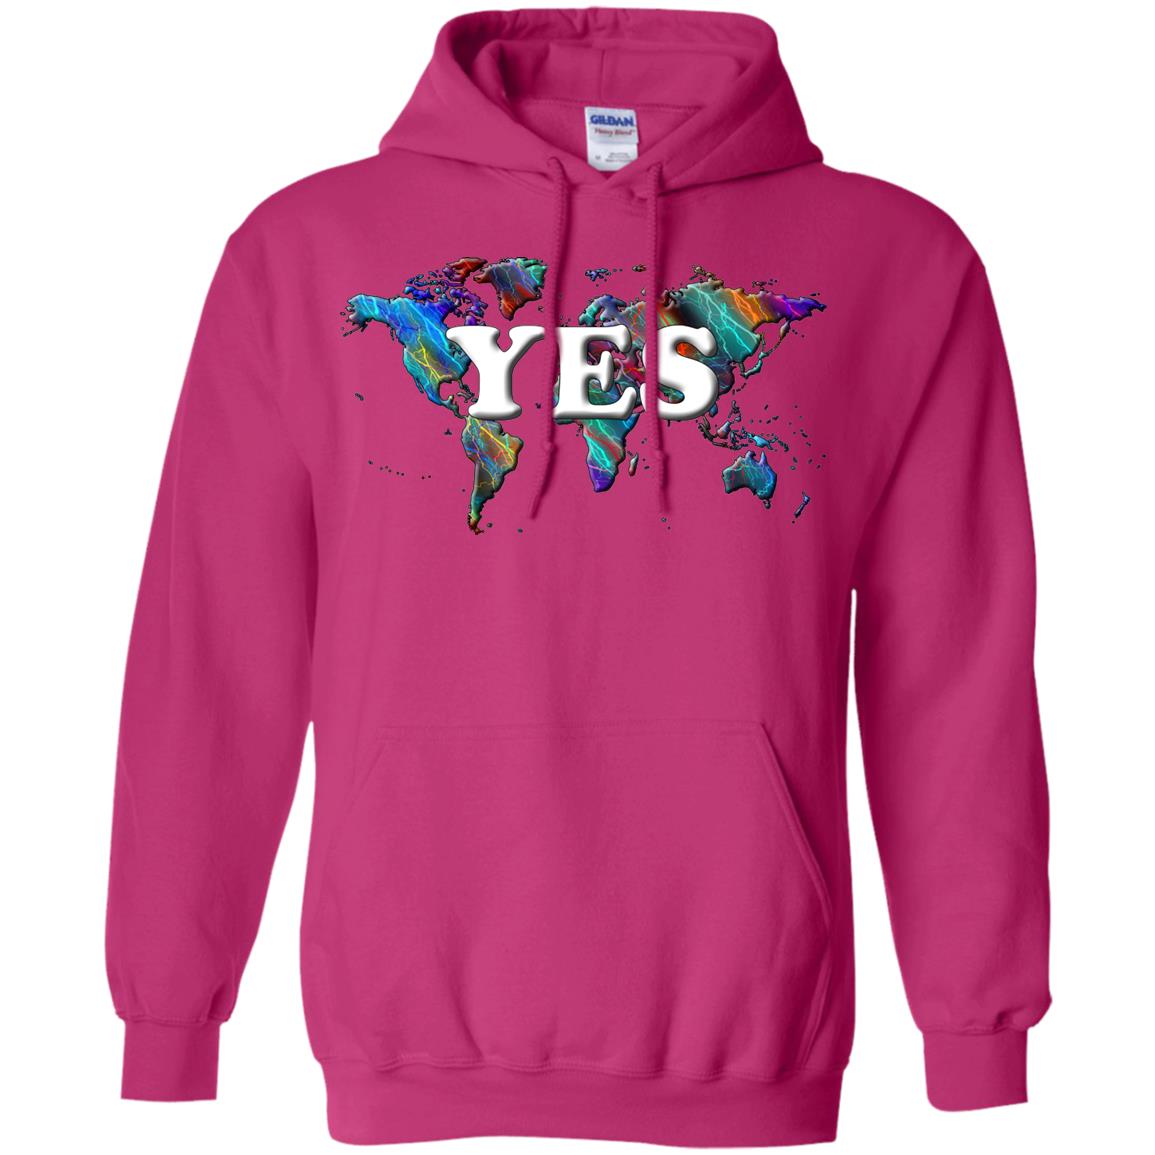 Yes Statement Hoodie